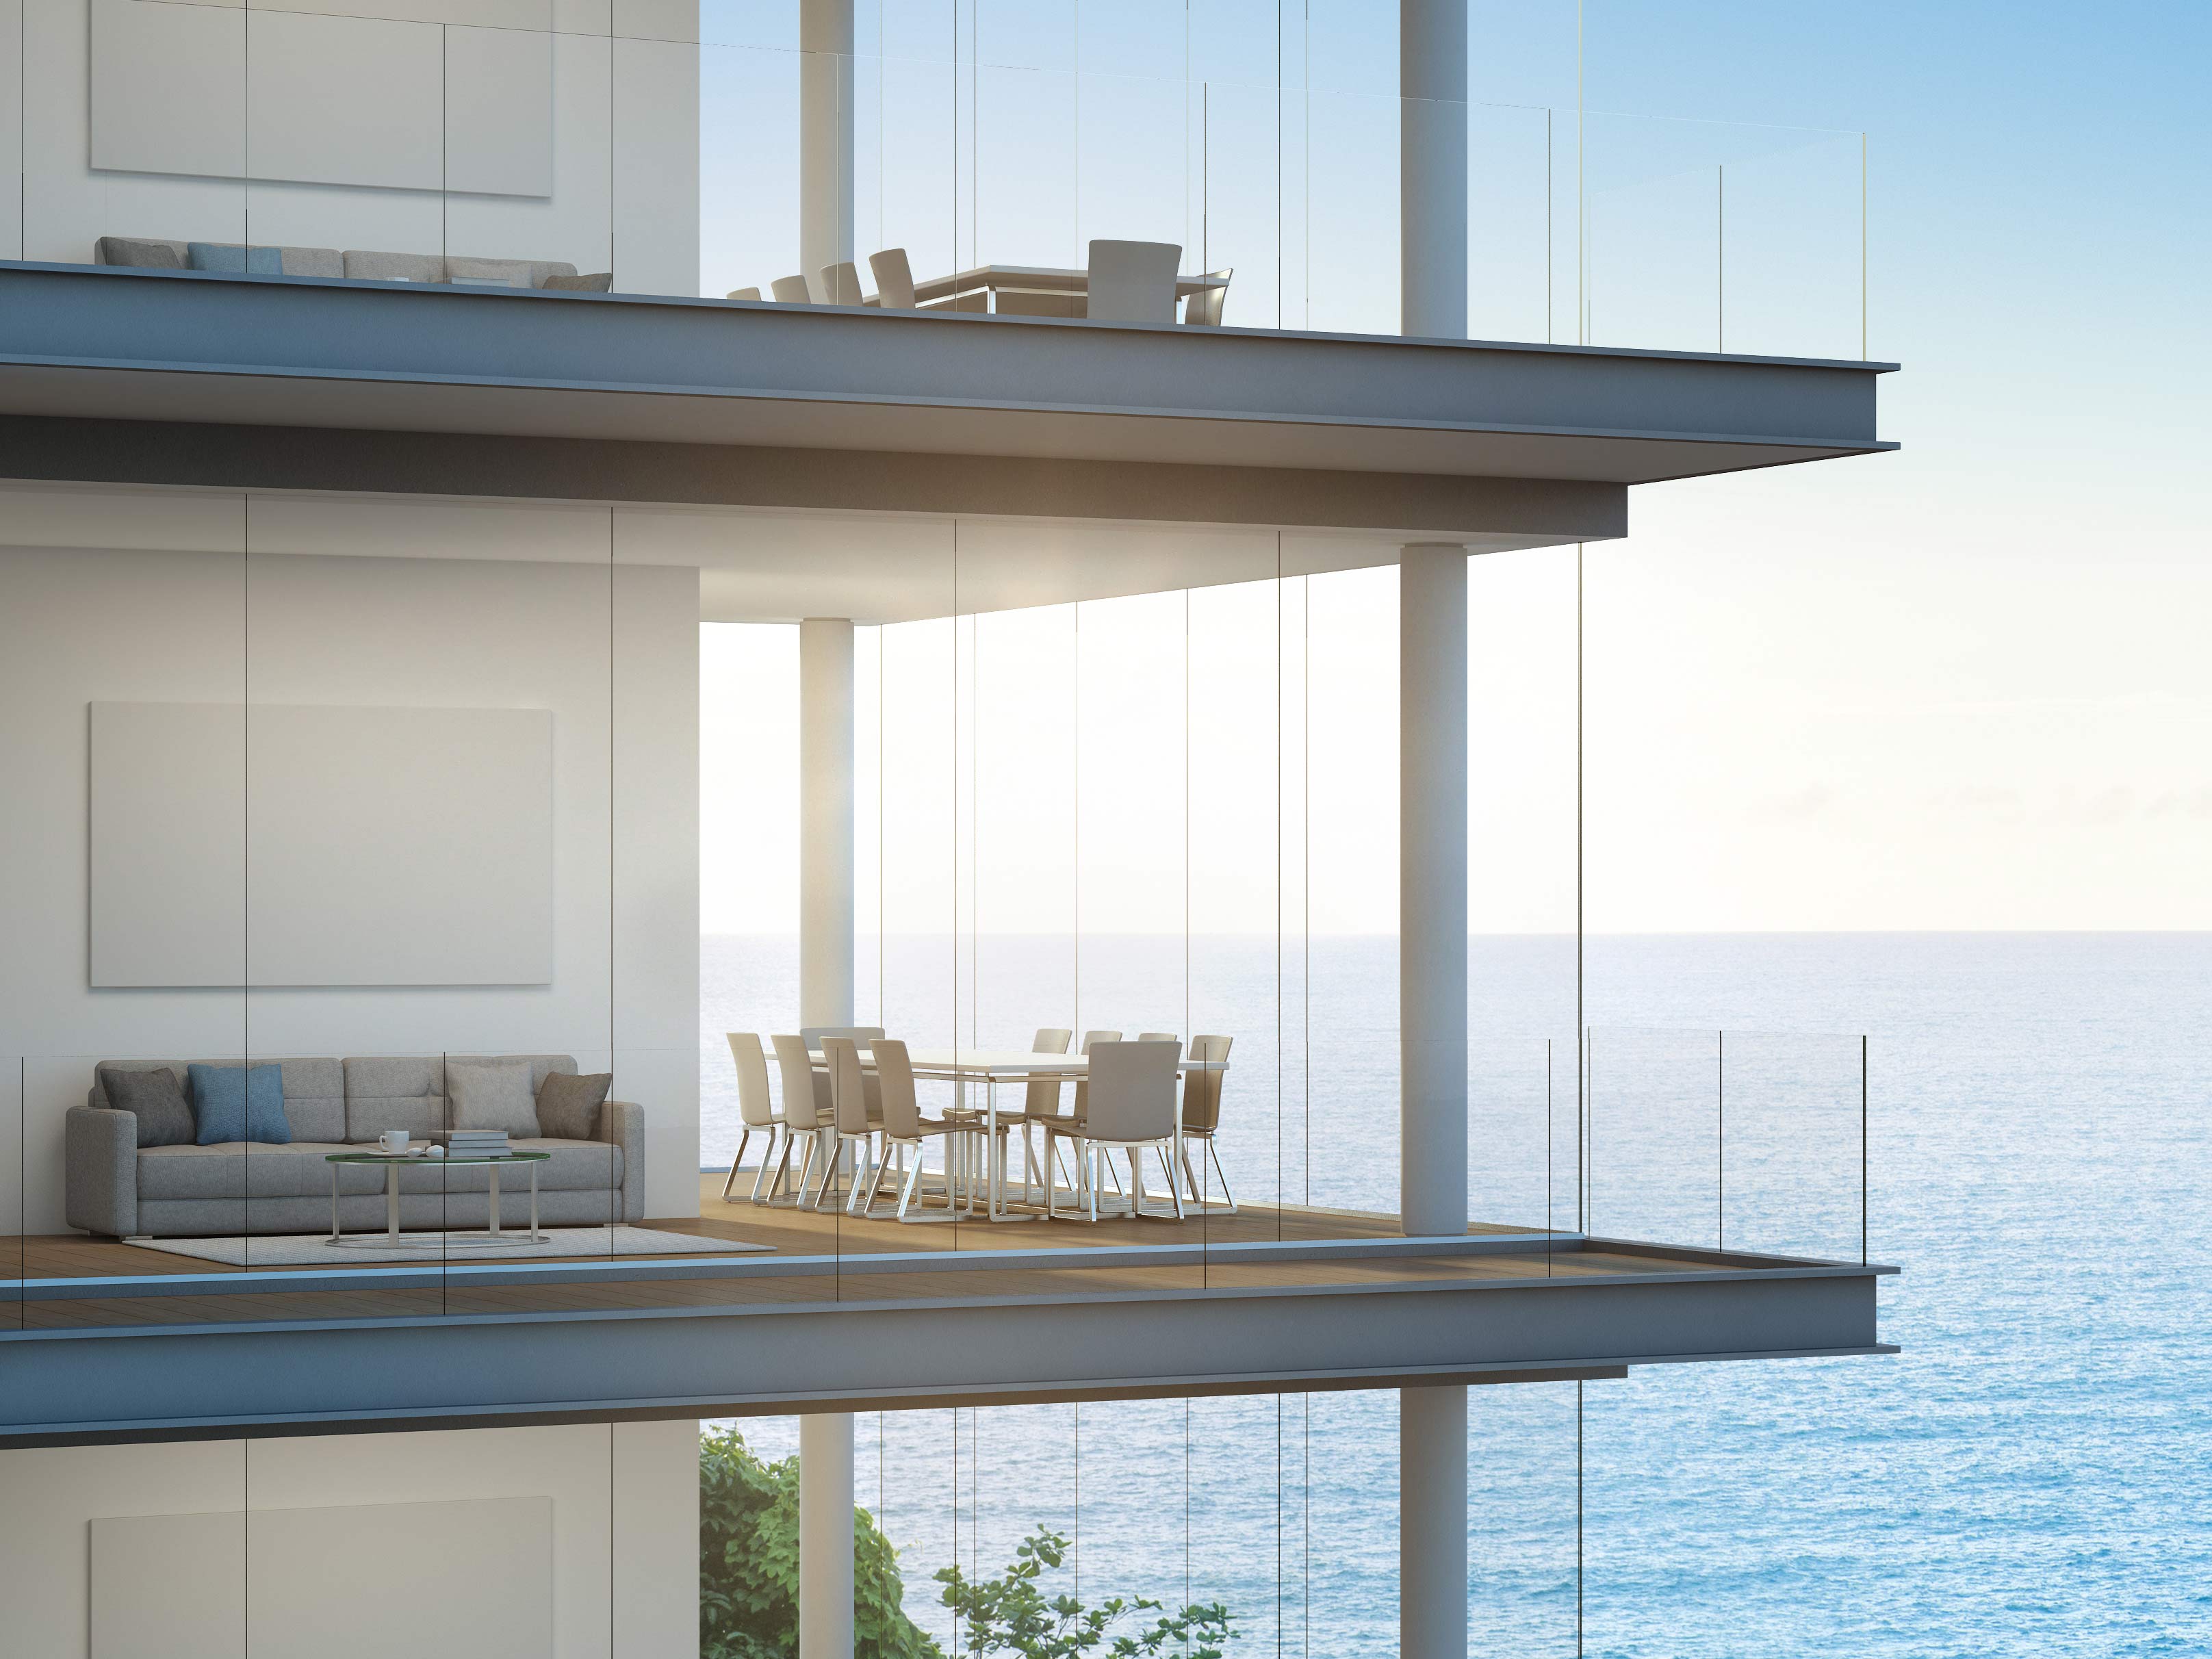 Luxury developments: Achieving vision through smart contracting (Part 1)